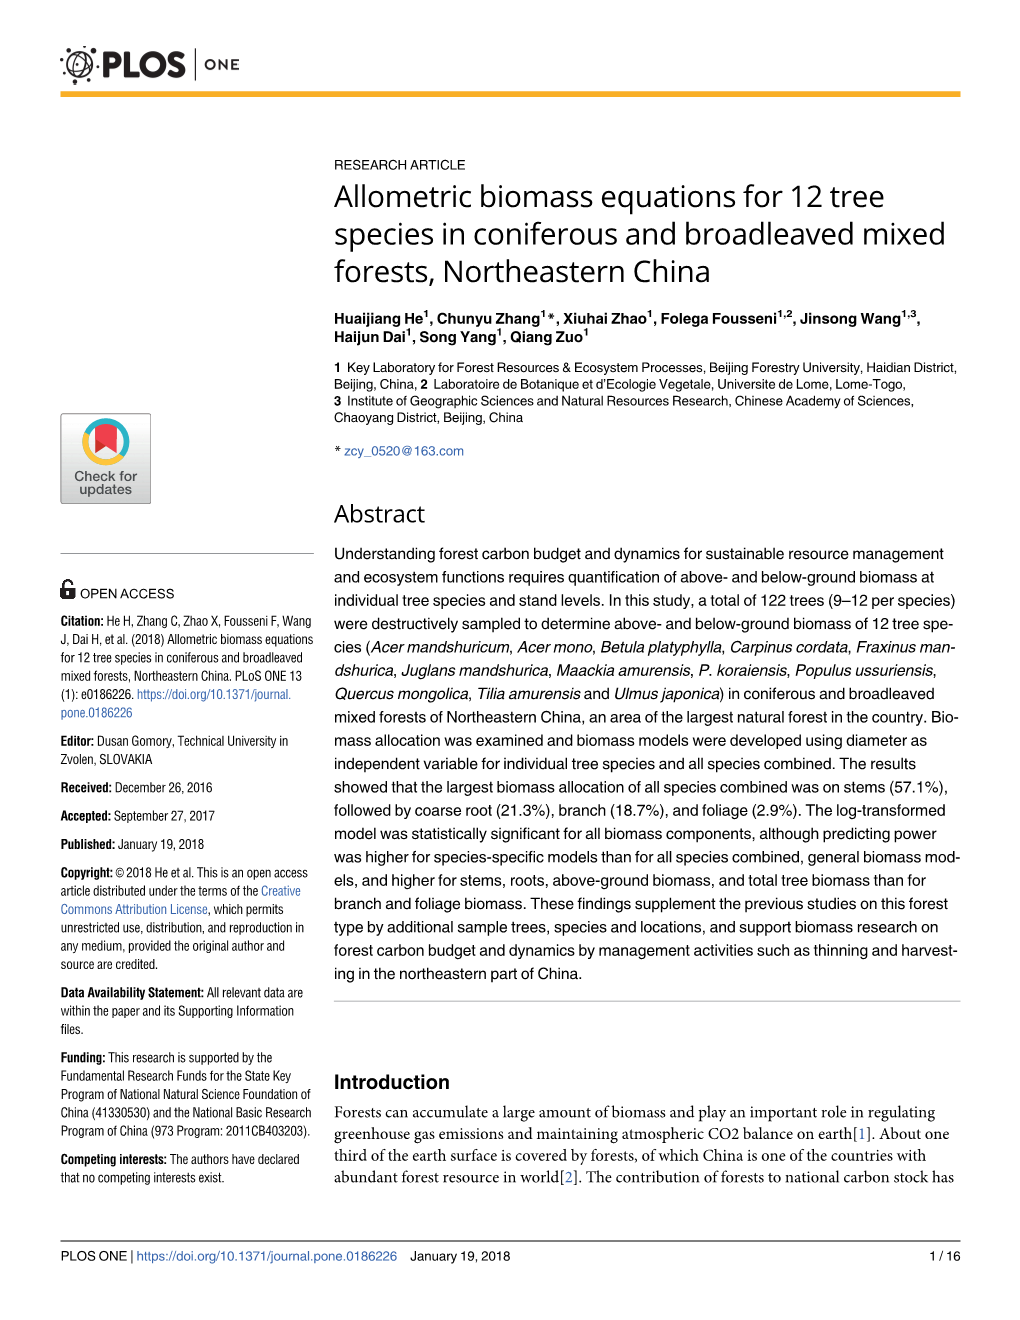 Allometric Biomass Equations for 12 Tree Species in Coniferous and Broadleaved Mixed Forests, Northeastern China